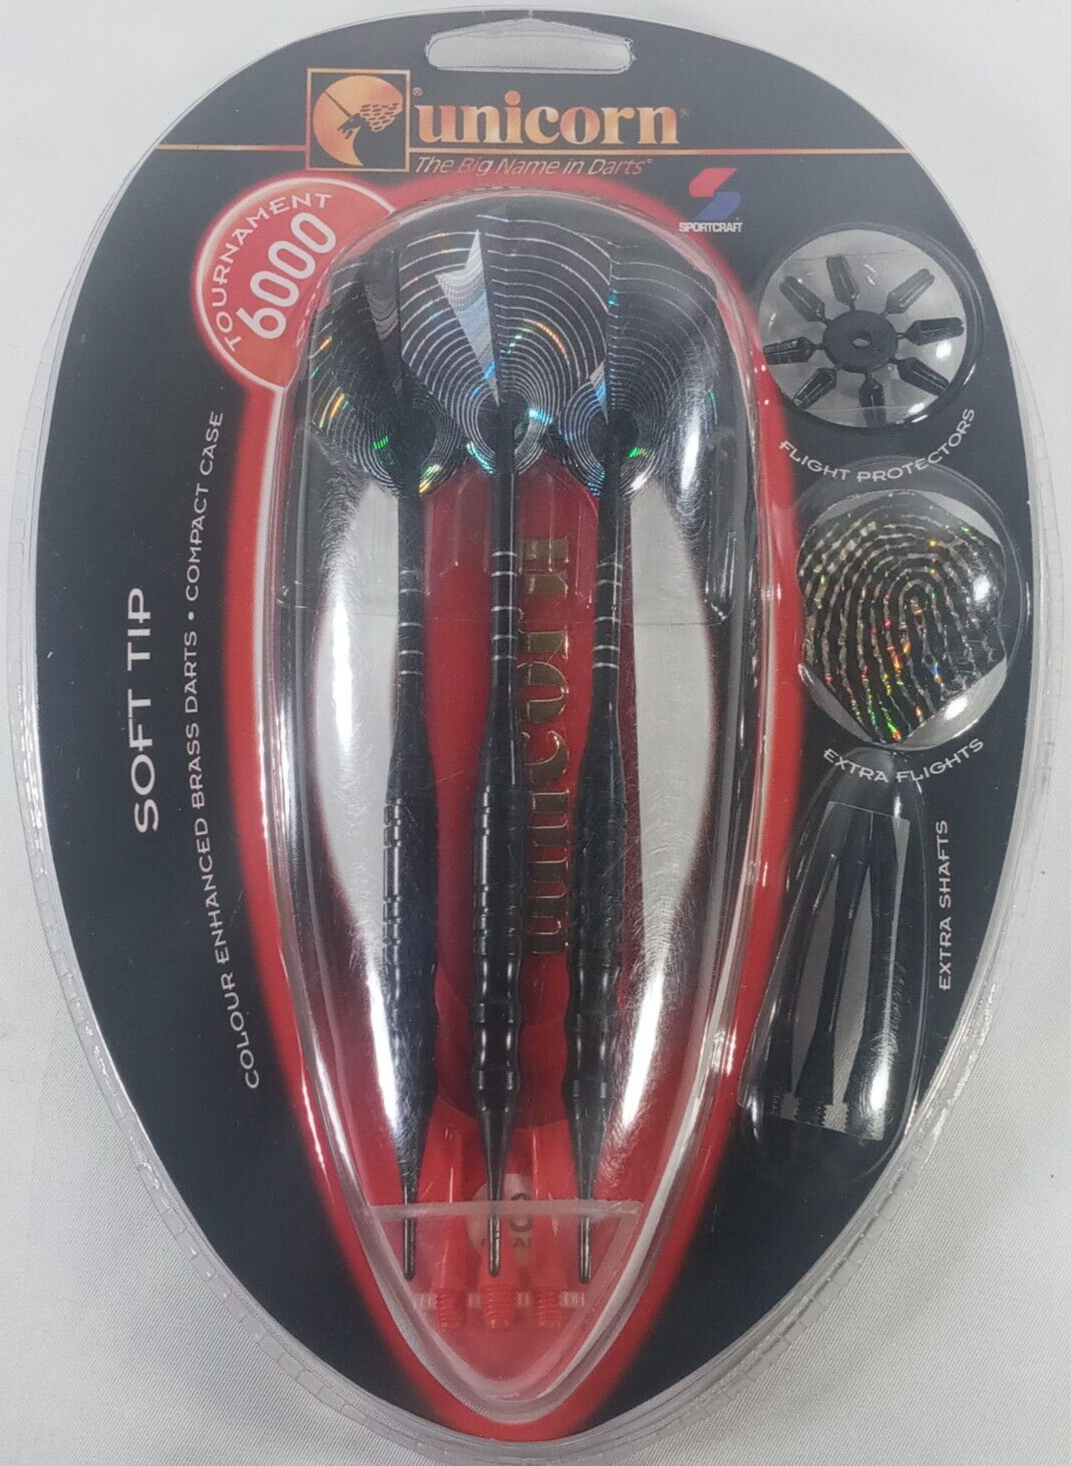 Unicorn 🎯 Soft Tip Brass Darts | Tournament 6000 | Case, Extras | NEW IN BOX UNICORN Does Not Apply